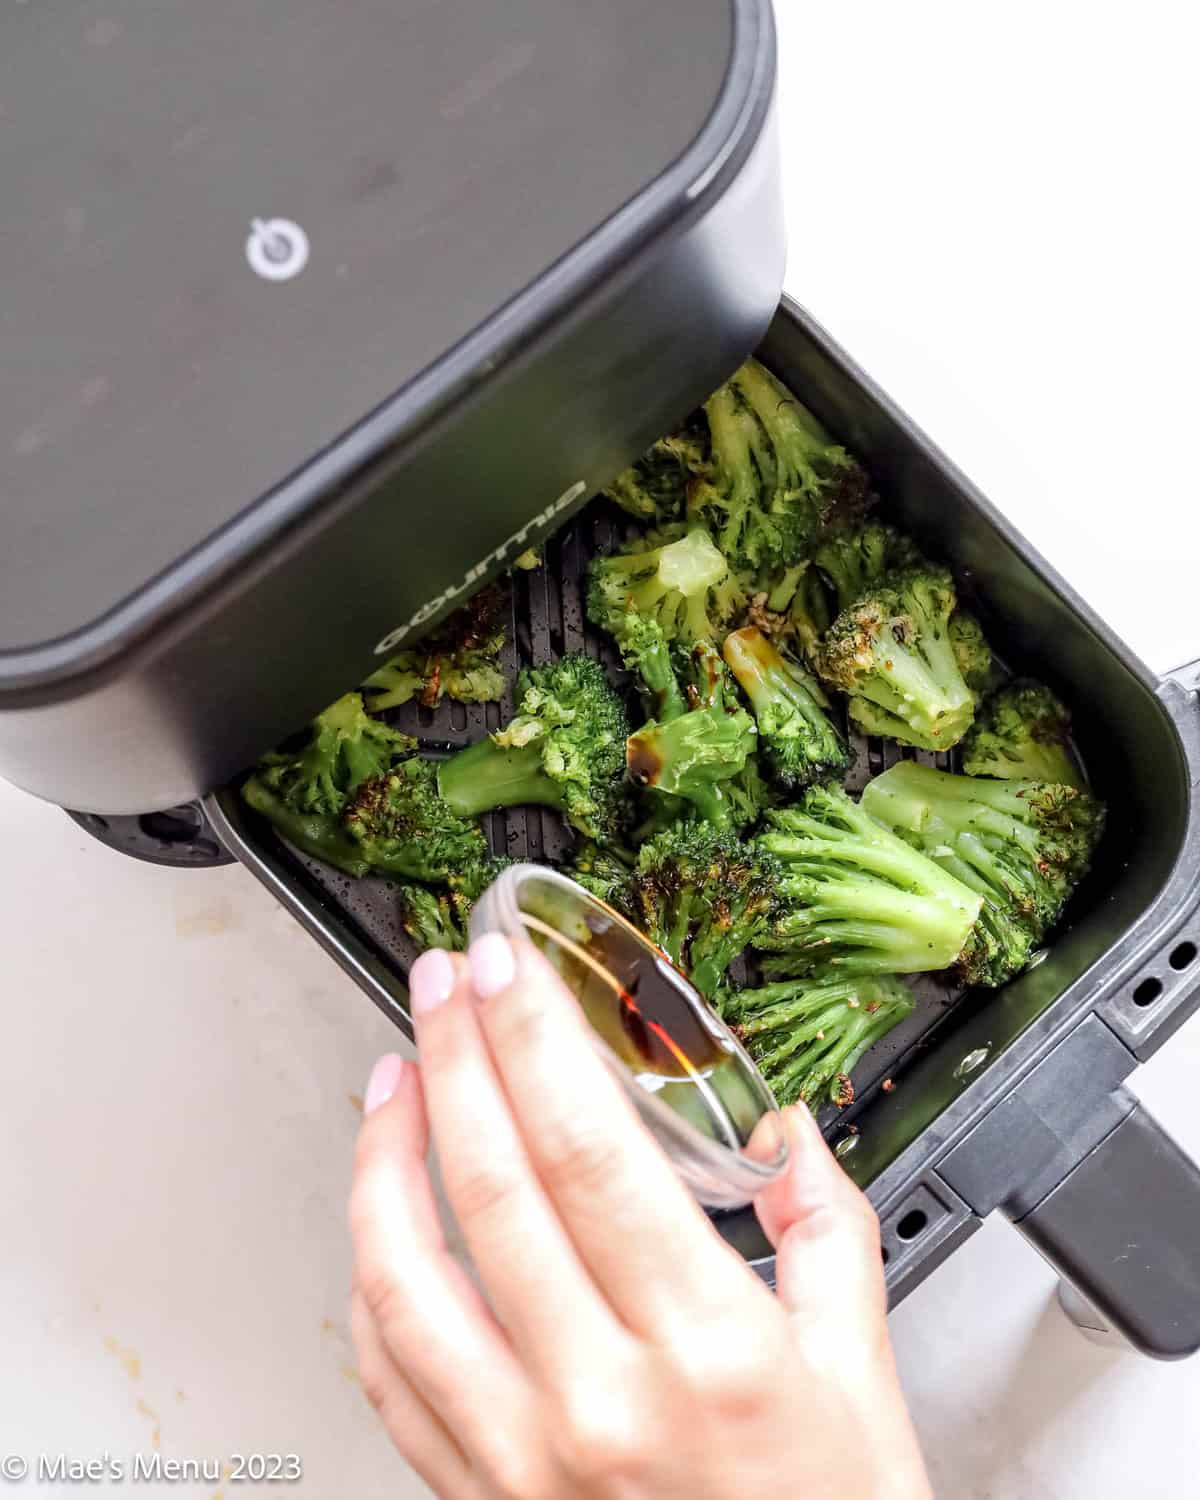 Pouring the balsamic vinegar over the broccoli in the air fryer.